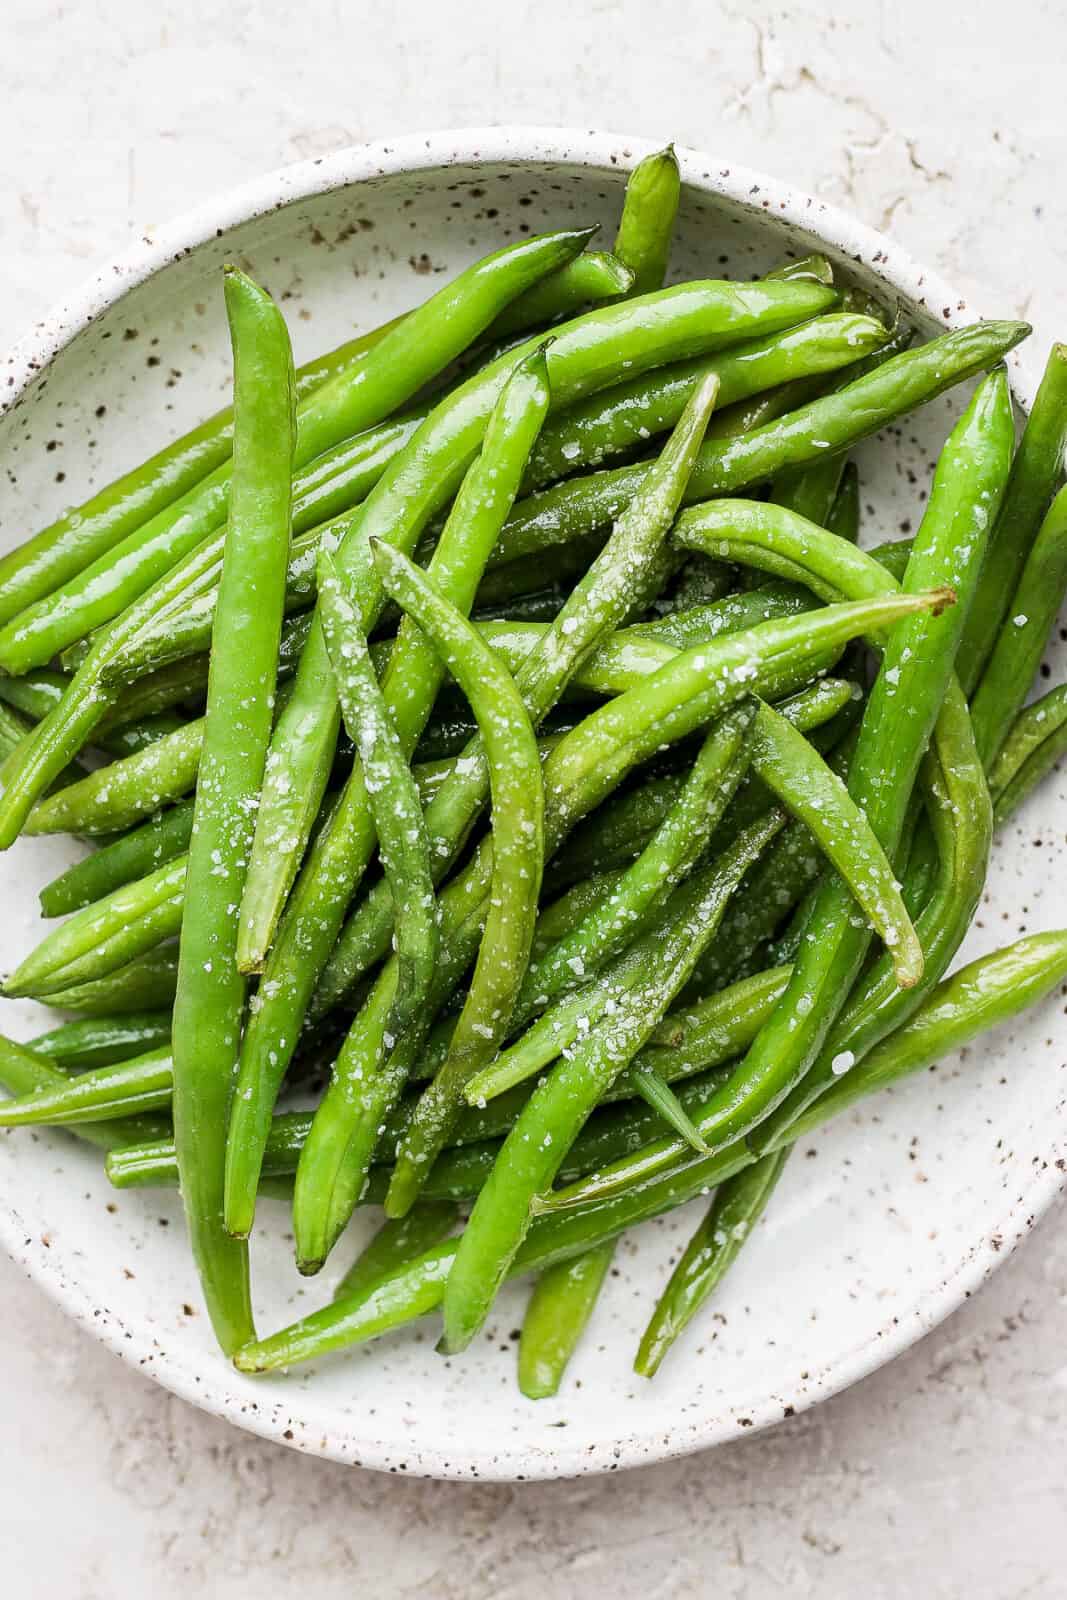 Smoked green beans in a bowl.